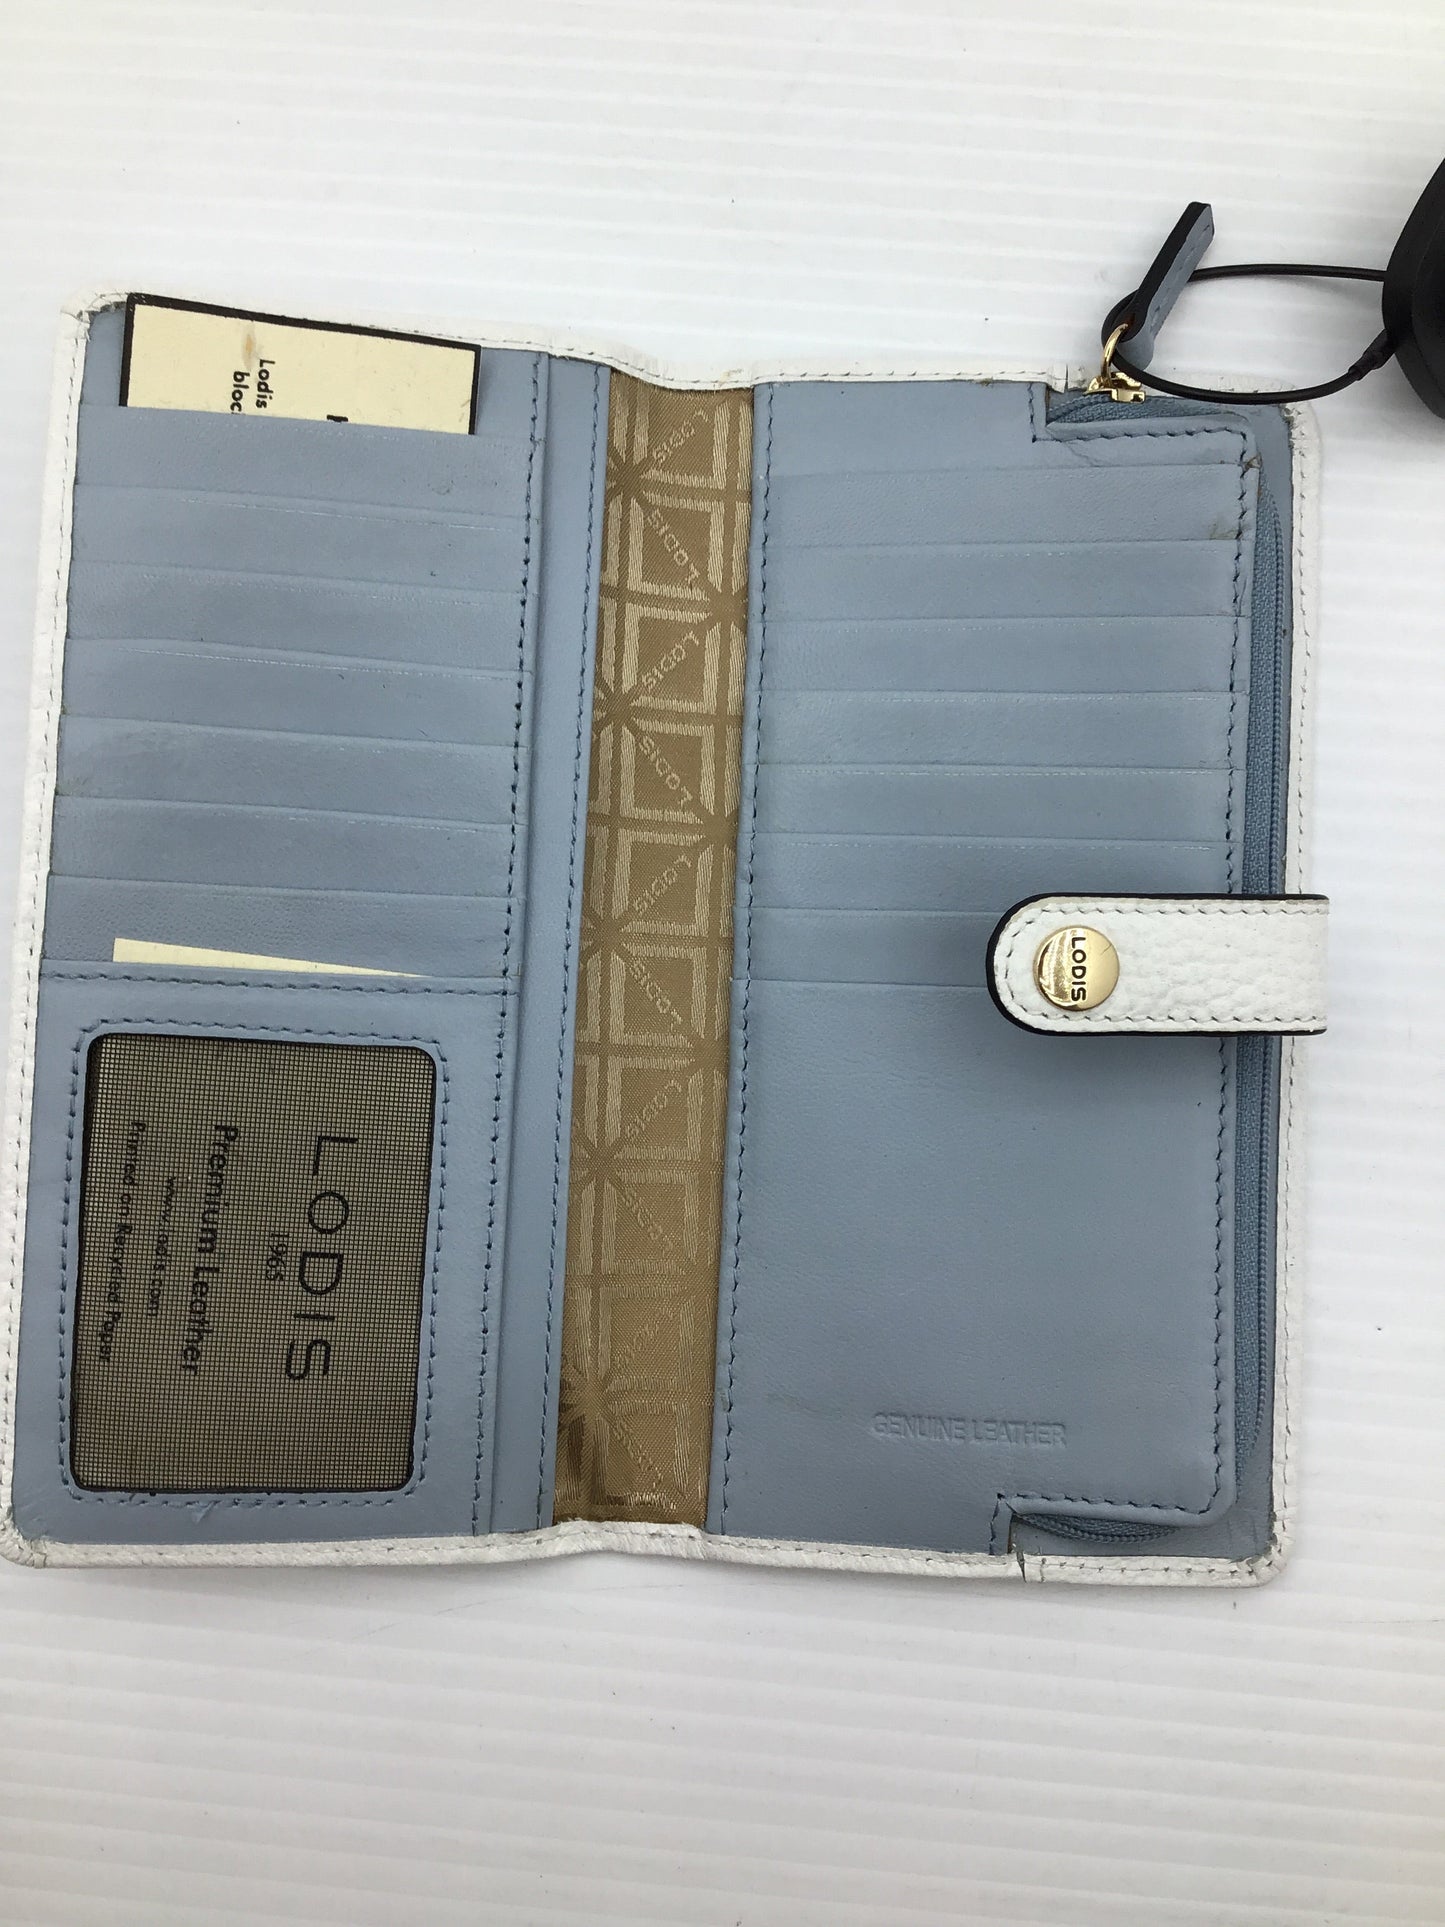 Wallet By Lodis  Size: Medium